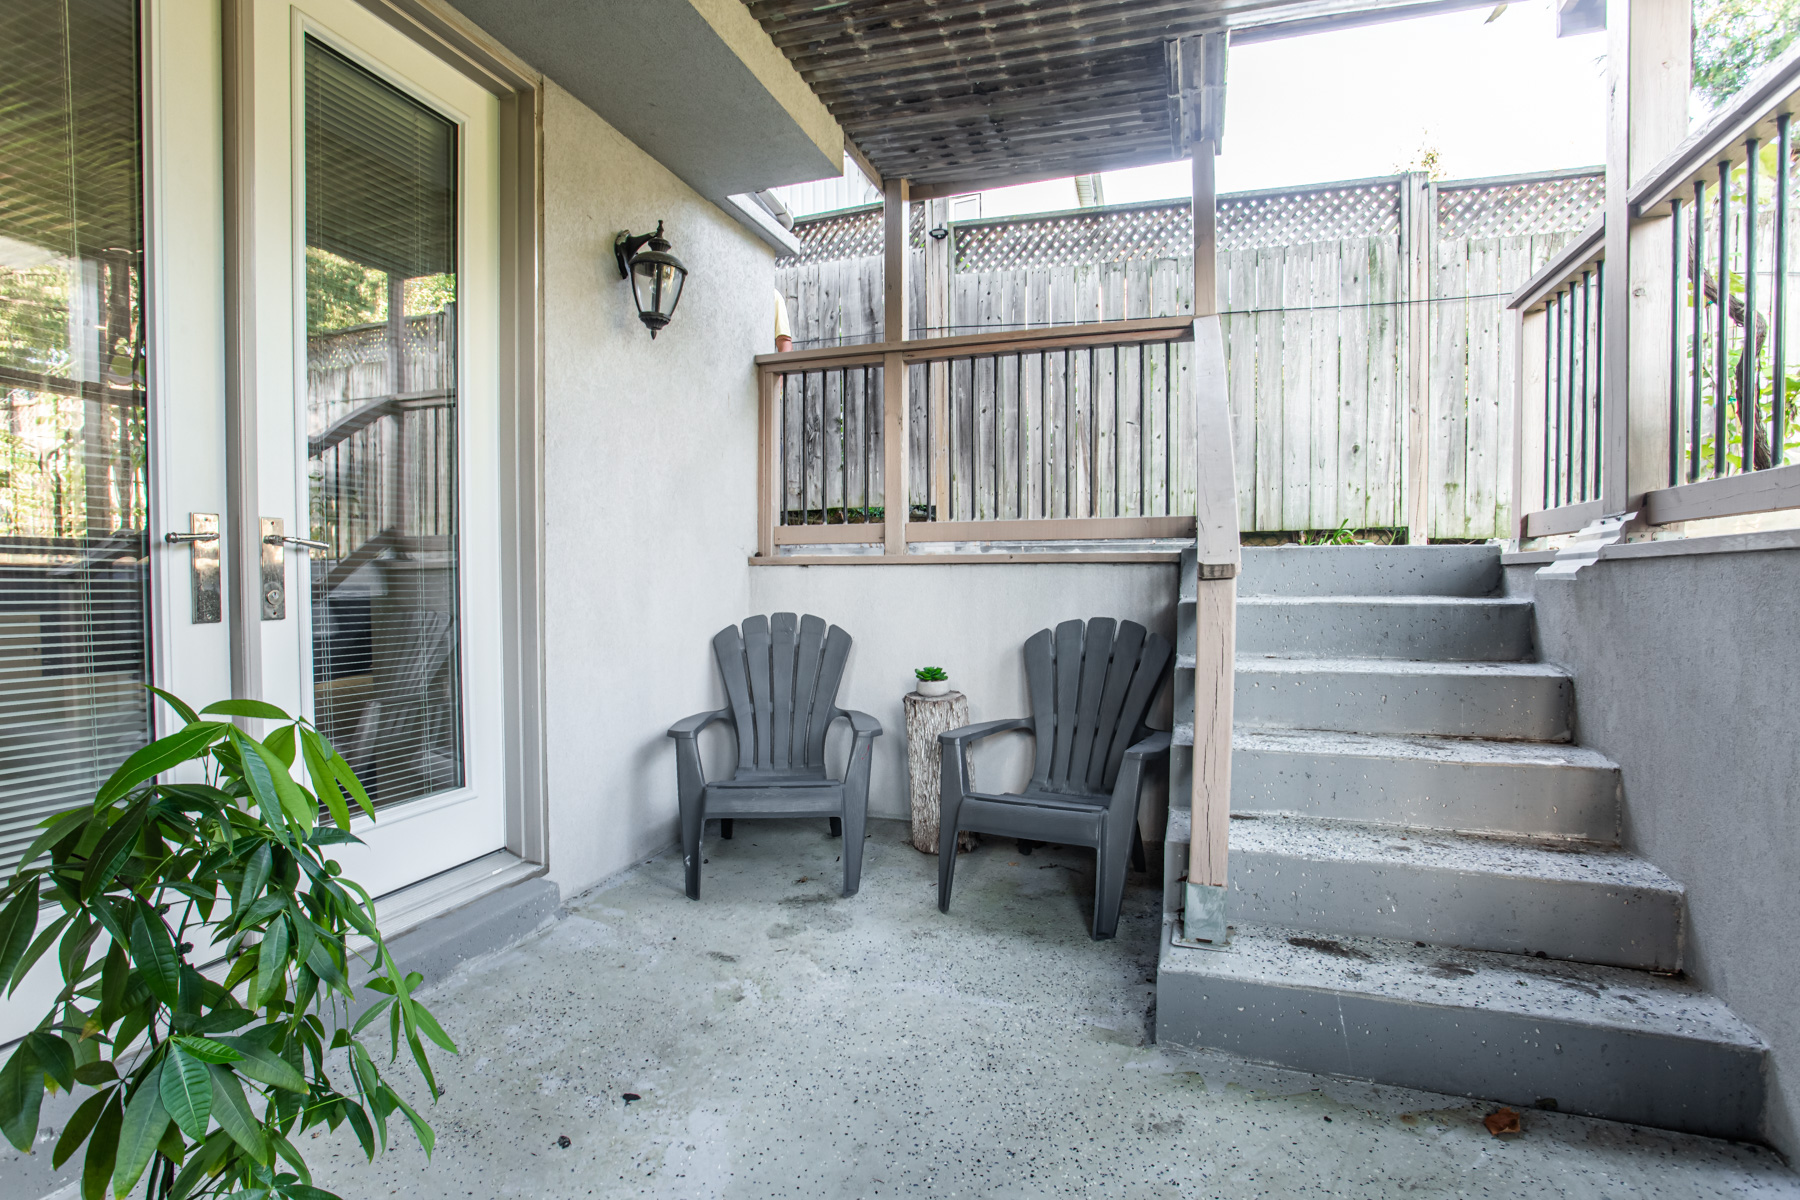 Patio of 741 Glencairn Ave with two chairs, plant and concrete steps.